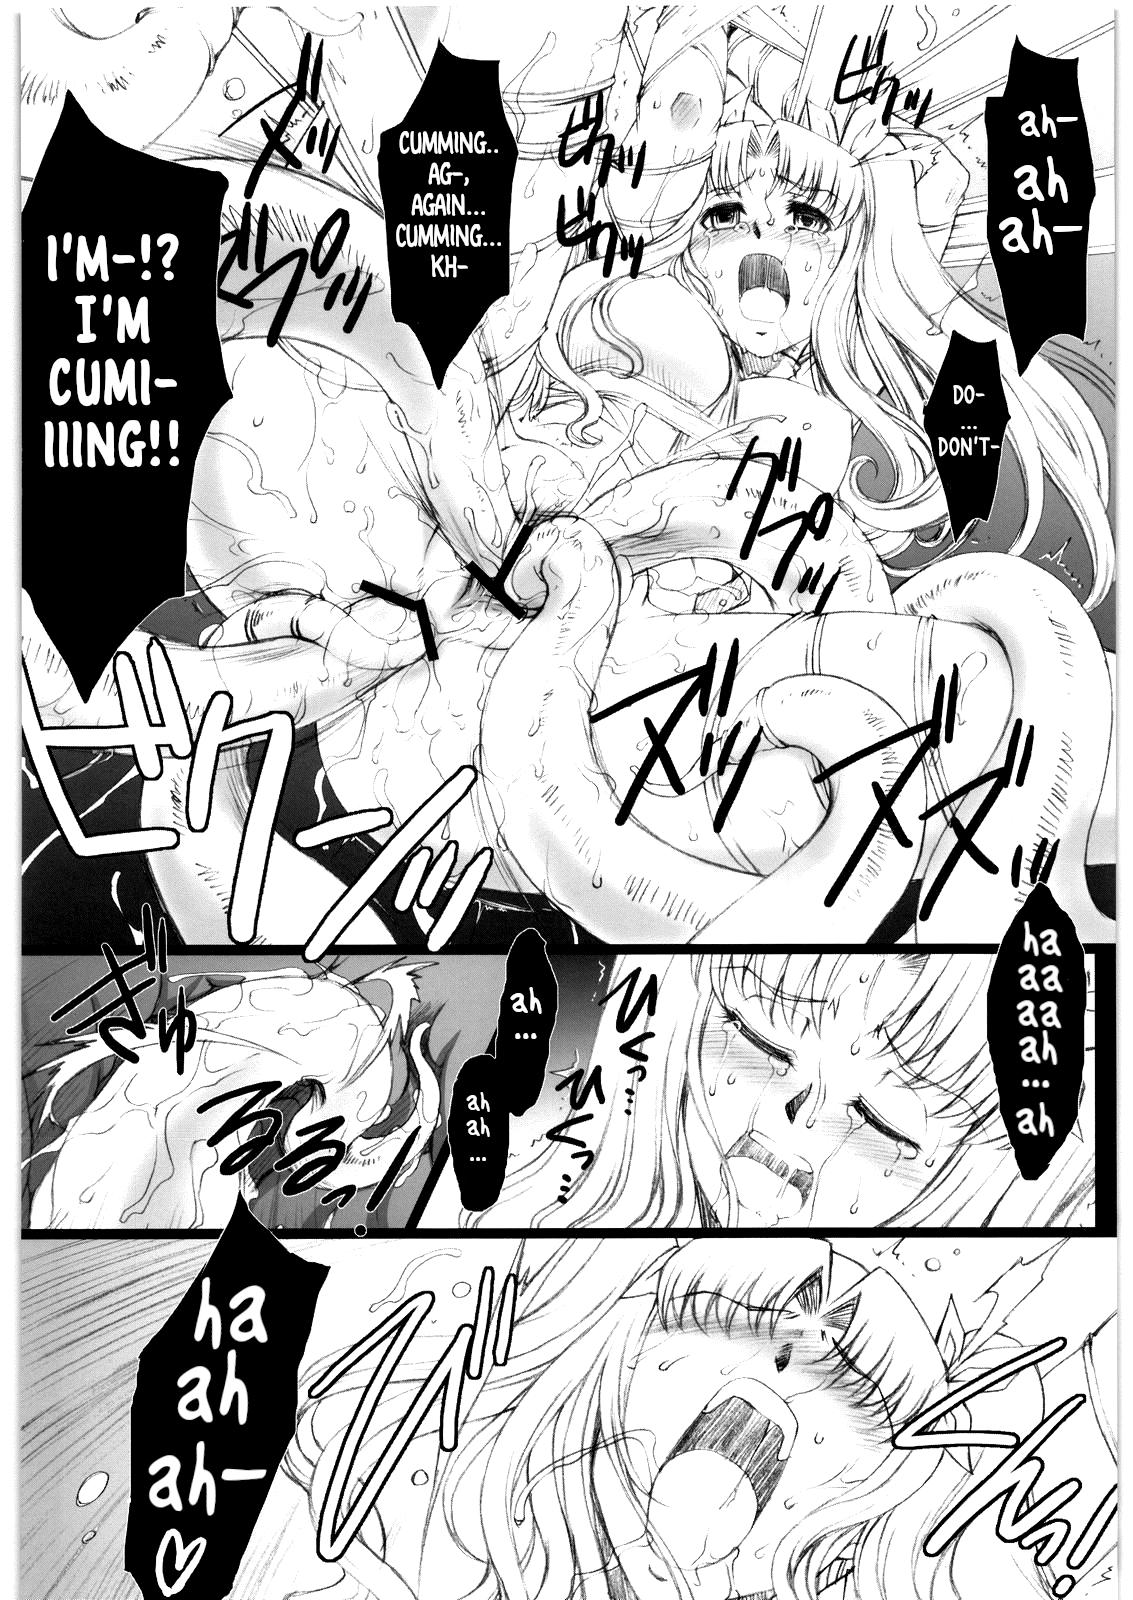 Longhair Red Degeneration - Fate stay night Amateur - Page 5